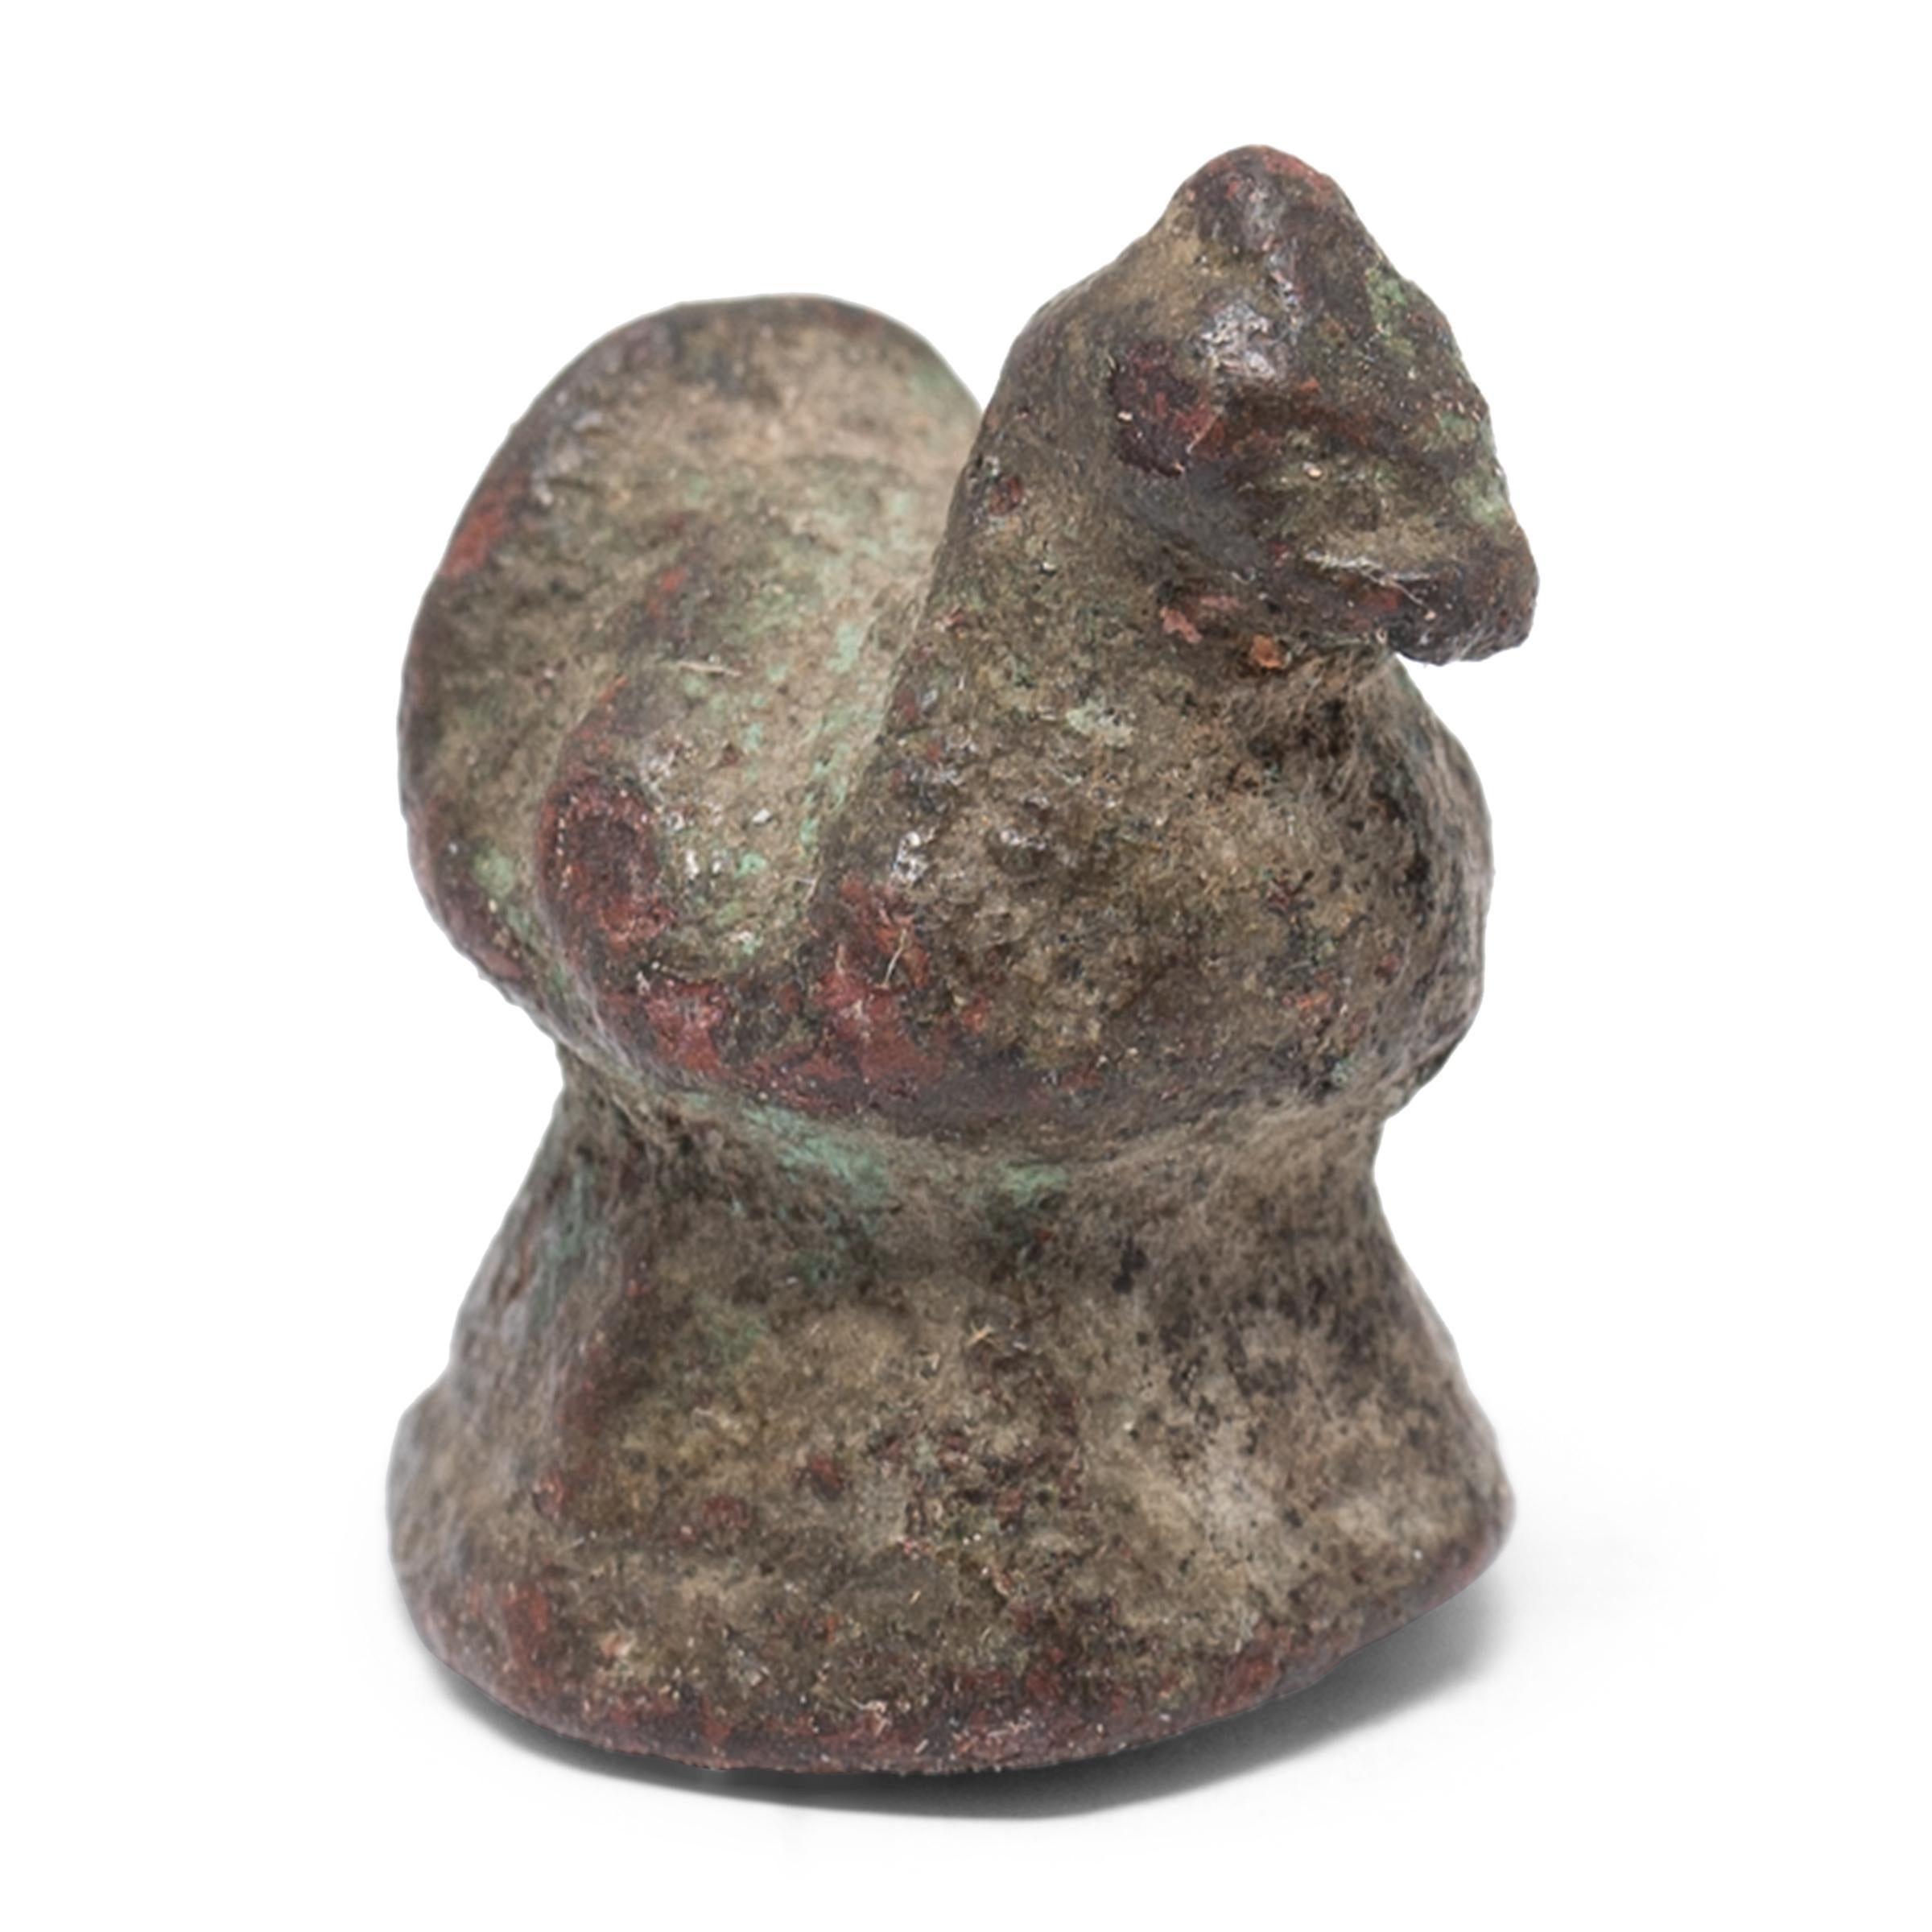 This small figurine was originally used as a counterweight for a tabletop balance, used to parcel out opium, spices, or other valuable goods. The petite weight is cast in bronze in the form of a rooster, the tenth symbolic animal of the Chinese